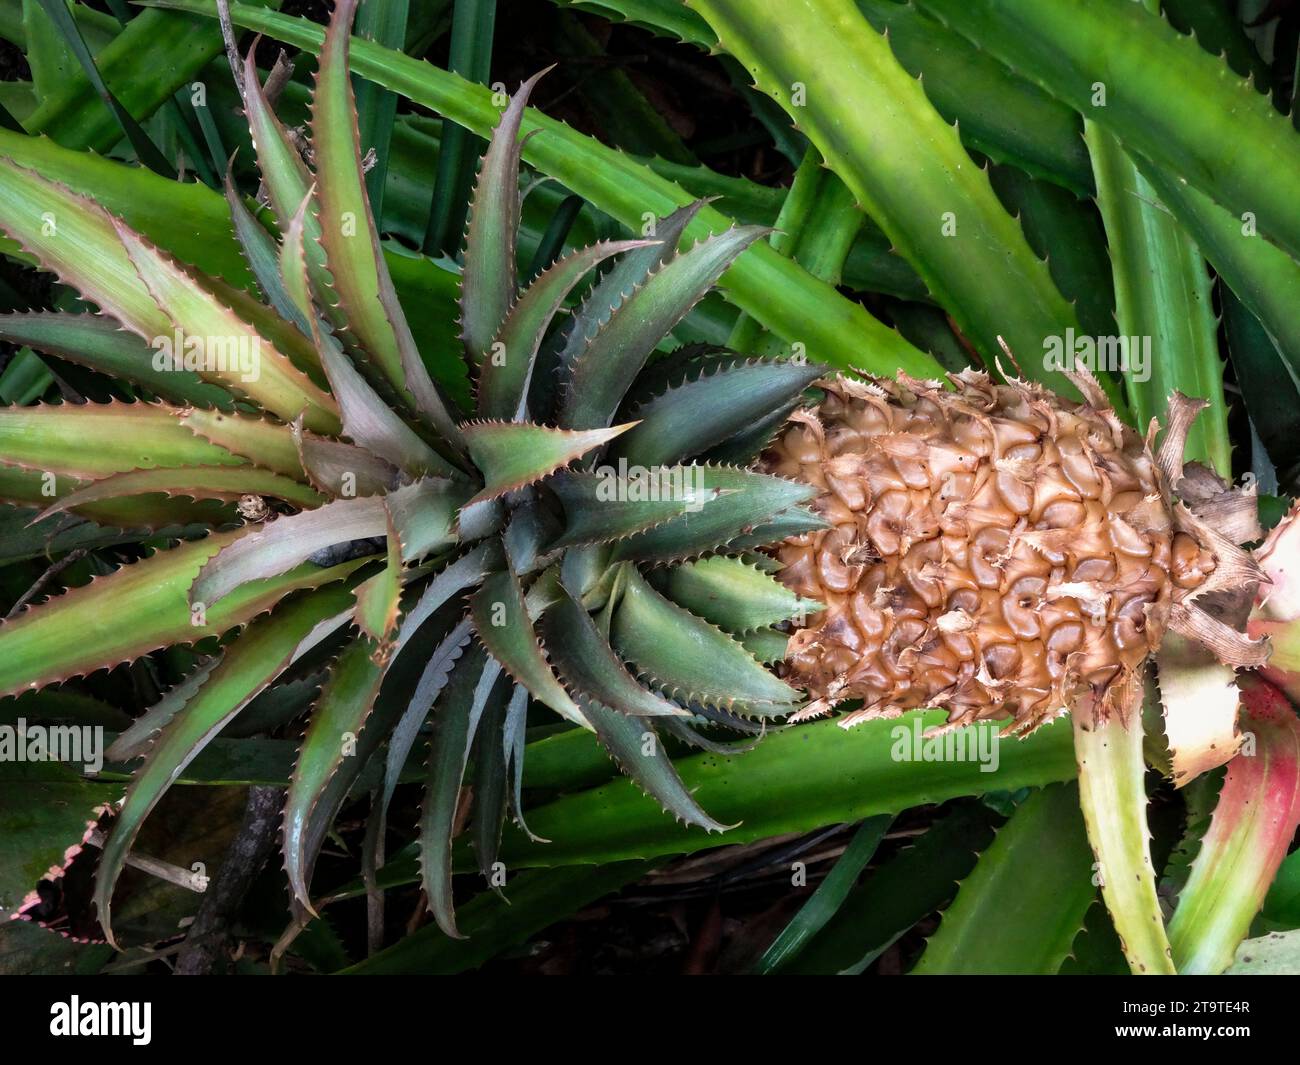 Natural close up fruiting plant portrait of succulent looking Ananas bracteatus, red pineapple. Stock Photo